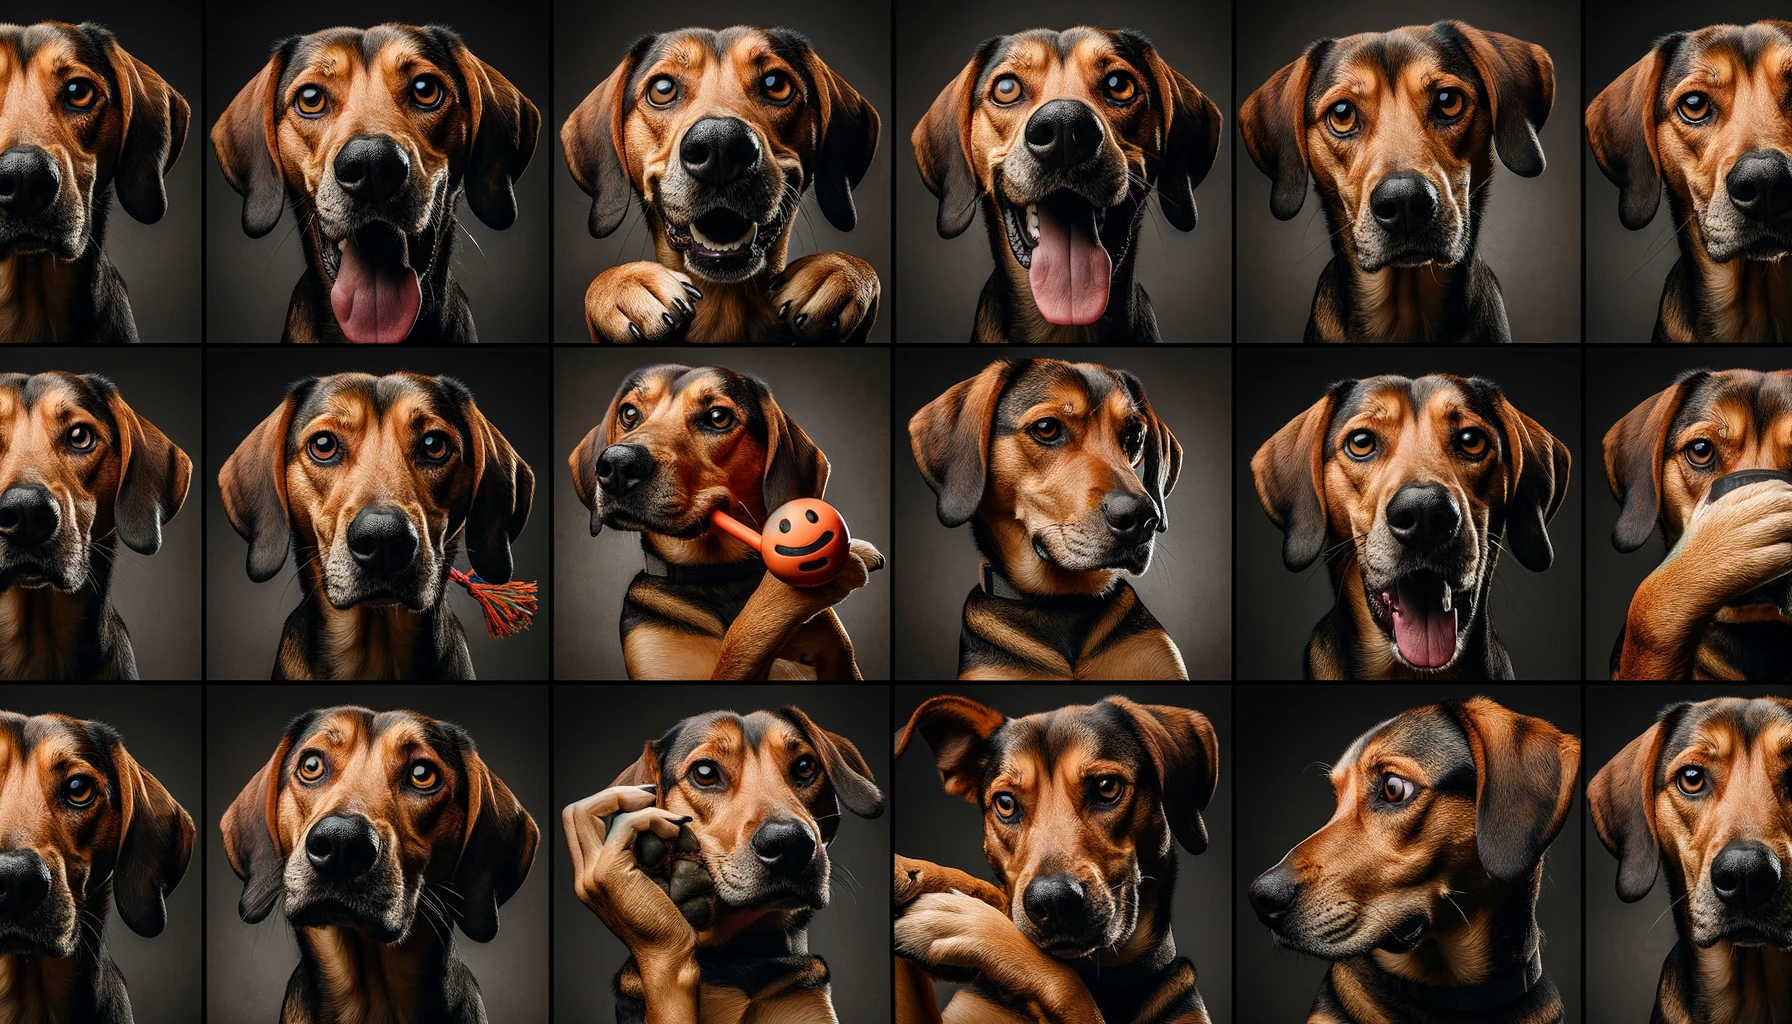 A Coonhound Lab Mix Capturing Hearts with Its Range of Expressions, from Playful to Serious